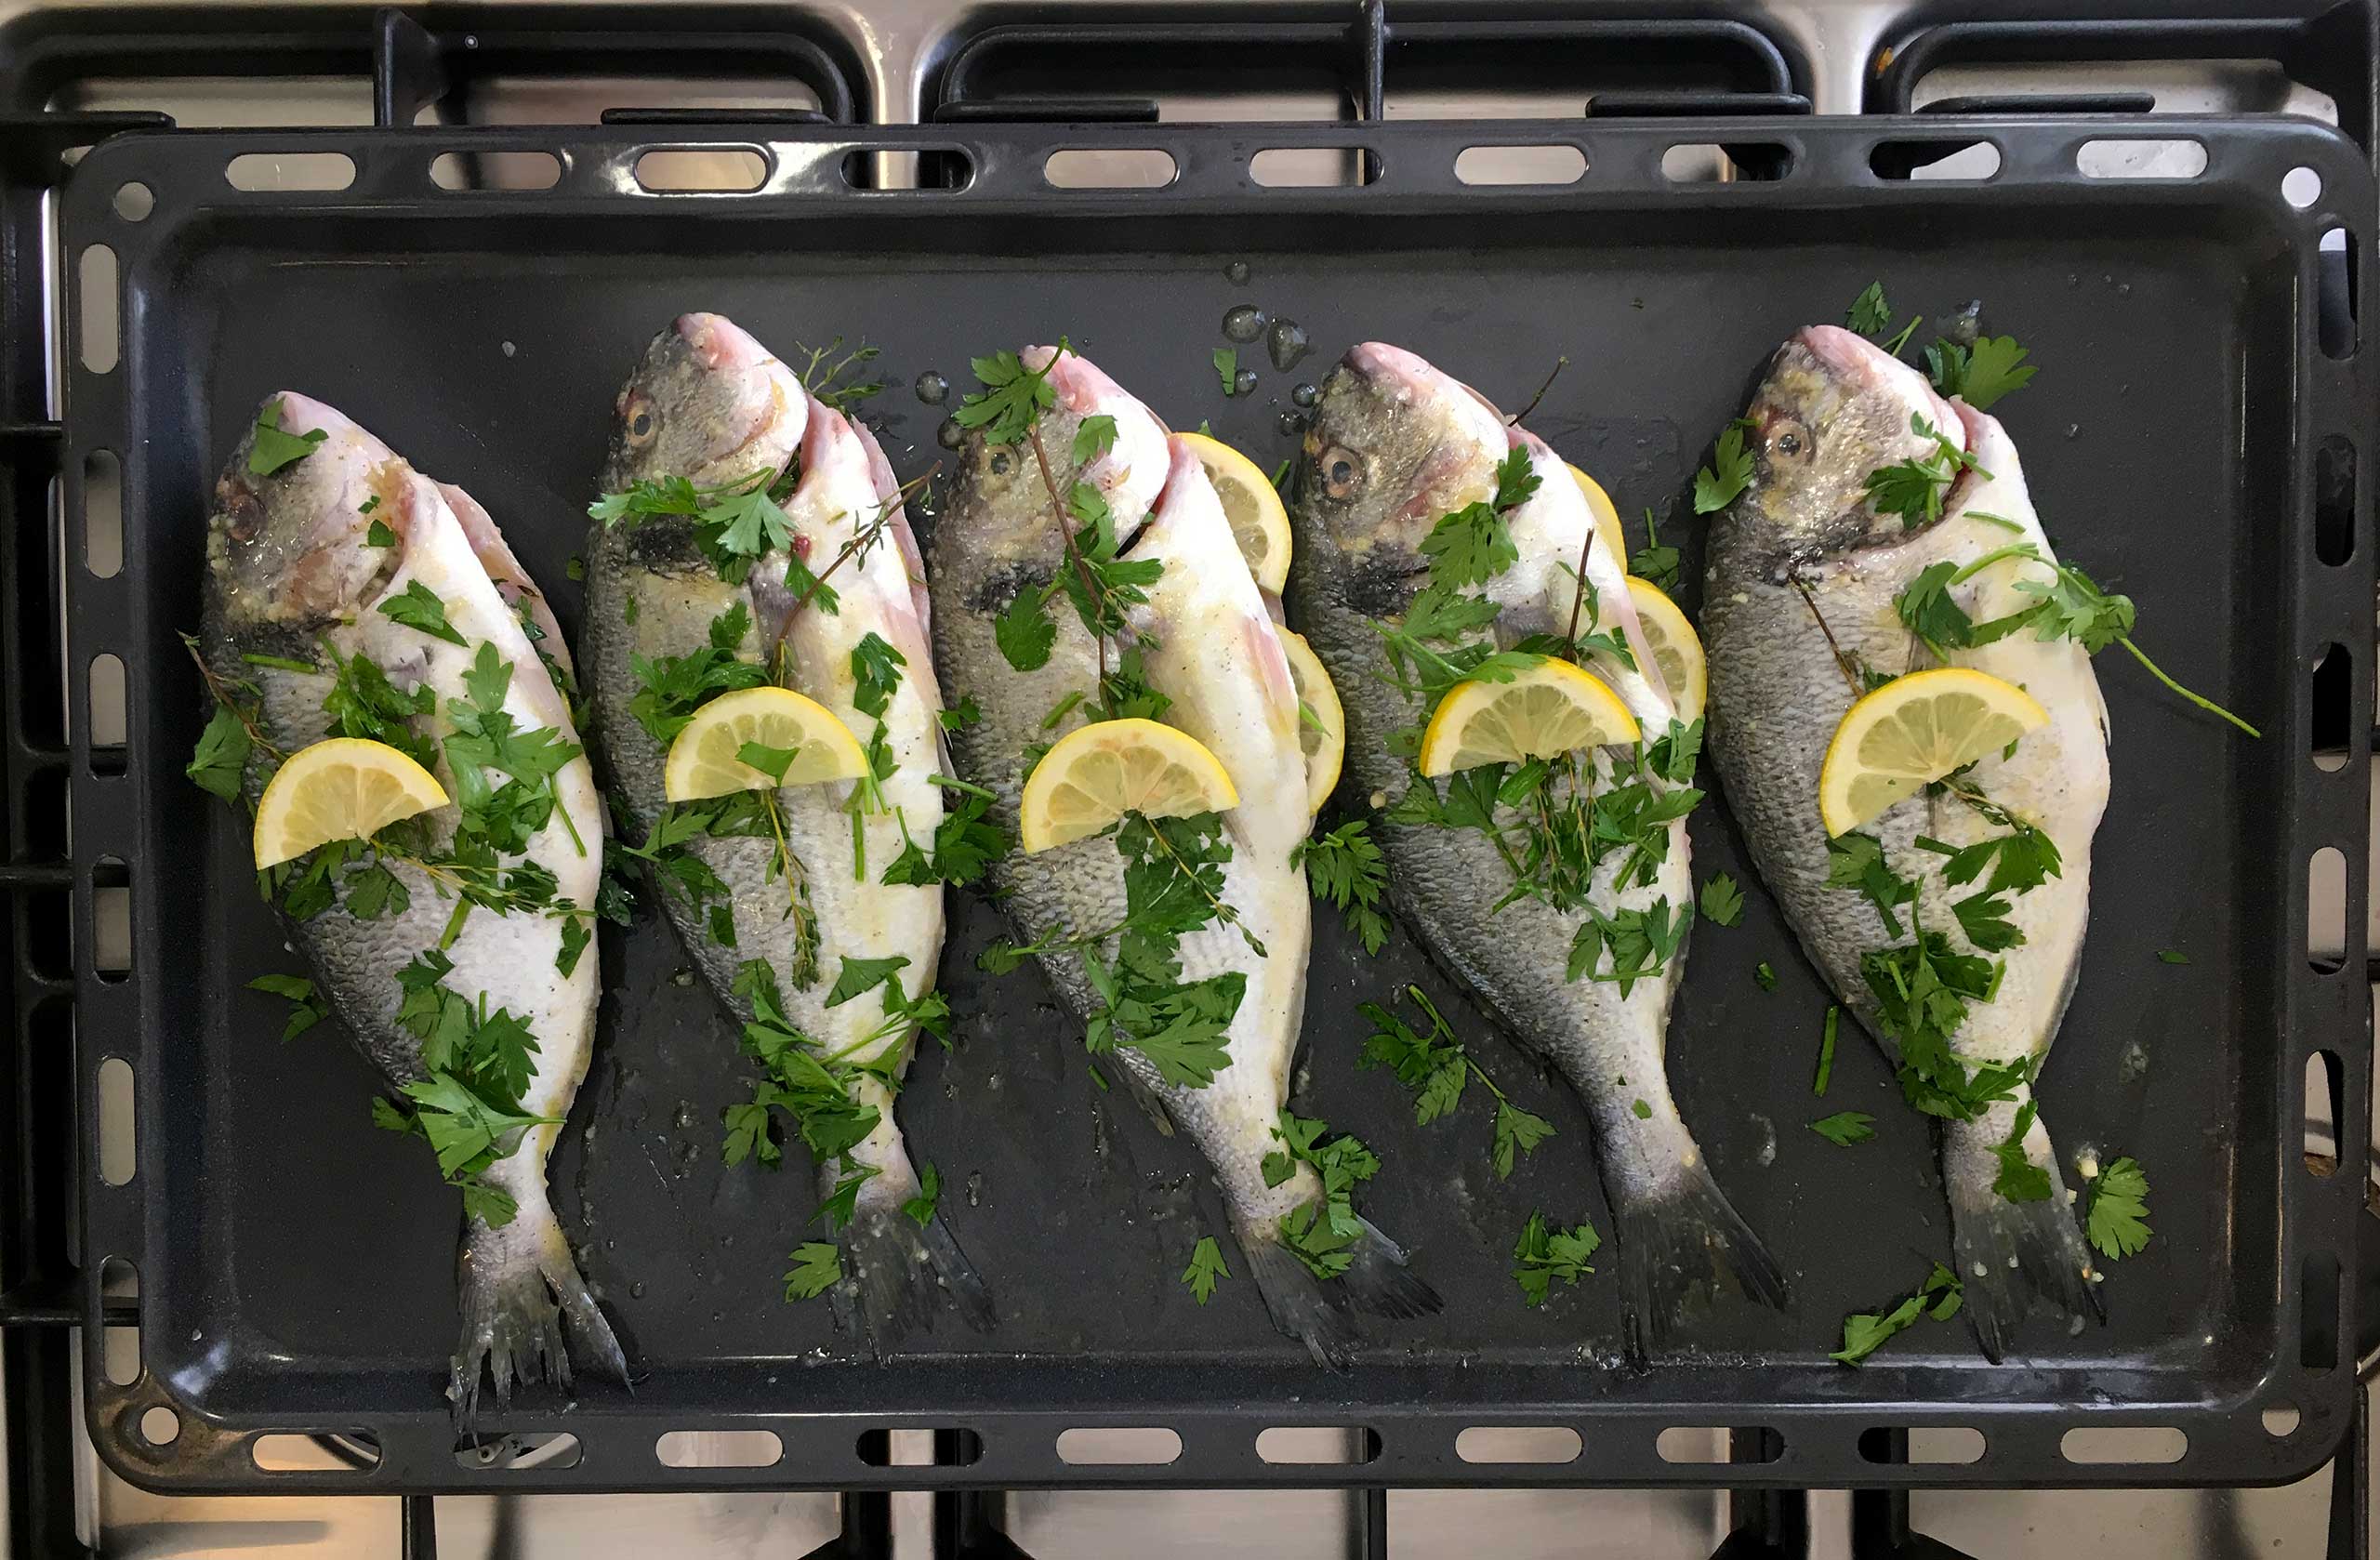 Place some parsely and thyme on the sea bream